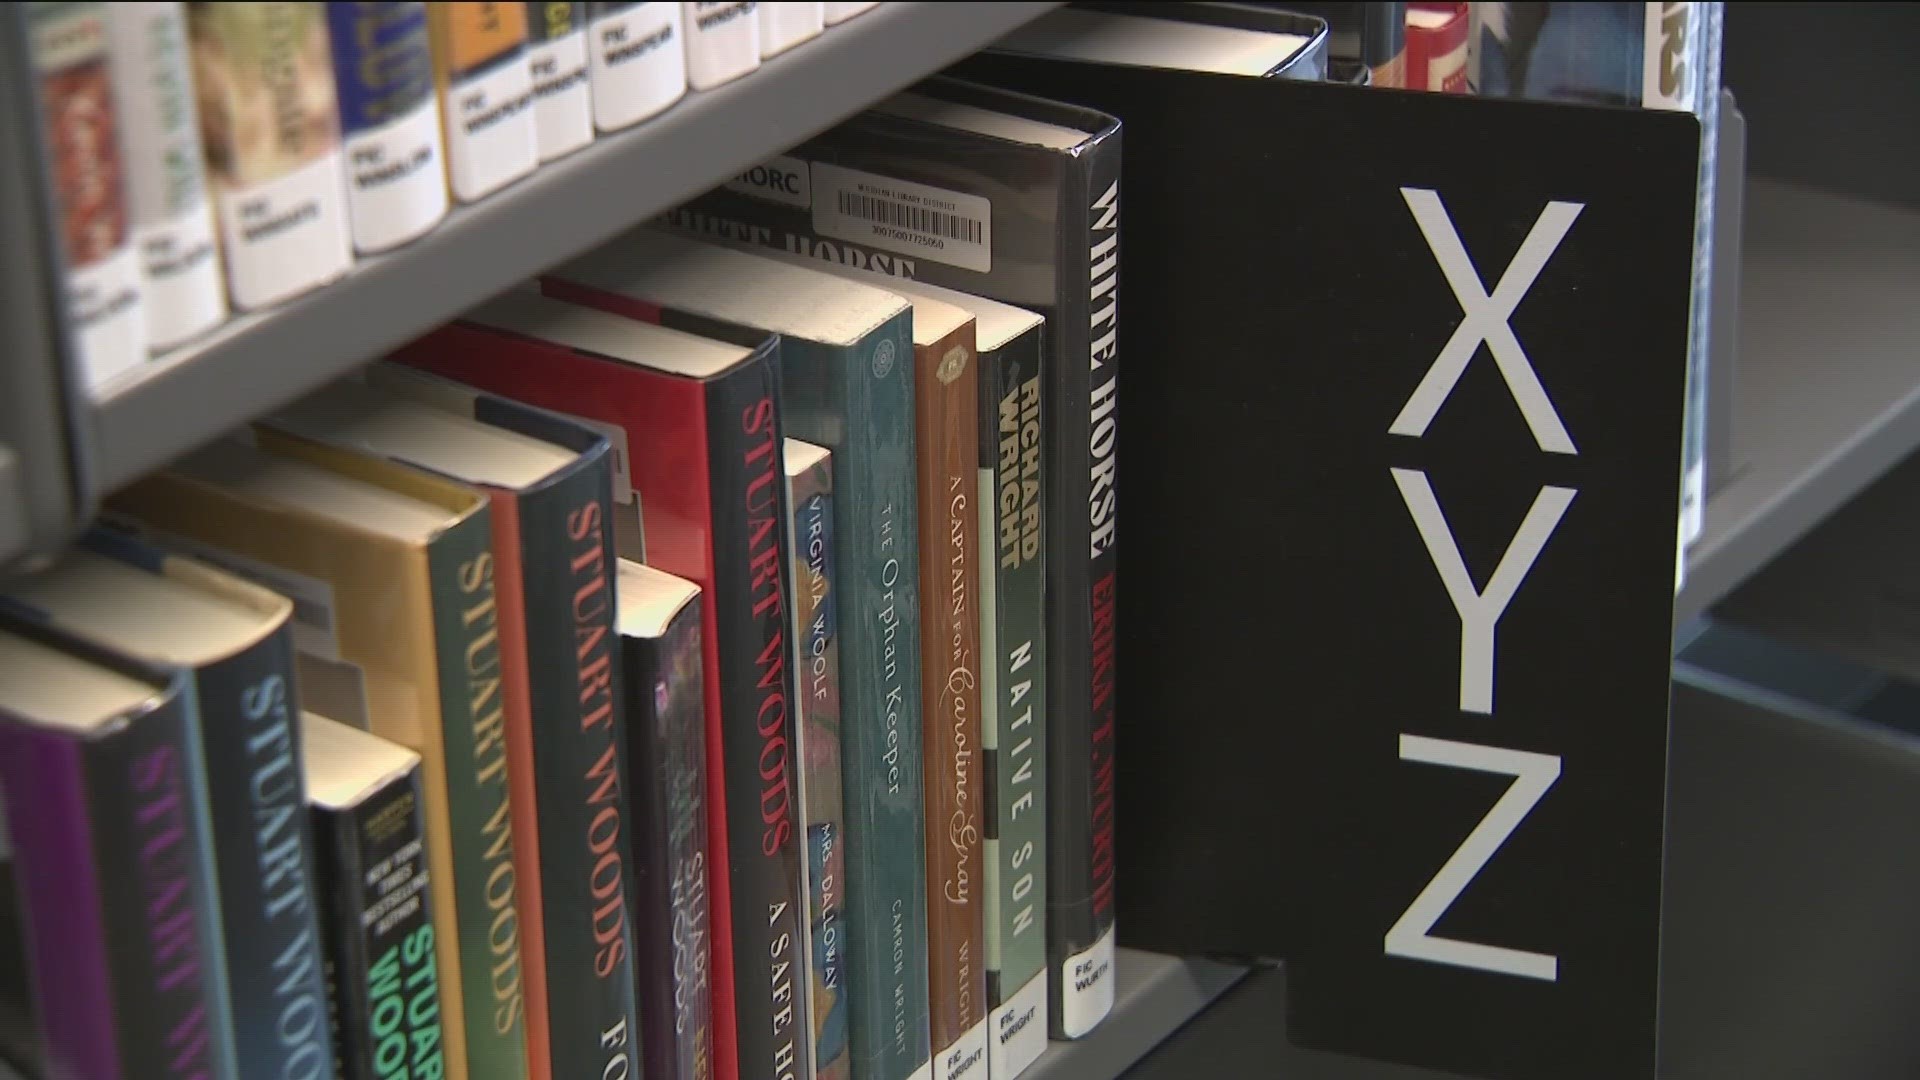 A "District Administrative Review" was done last week with the West Ada School District telling KTVB the decision to remove books wasn't made lightly.